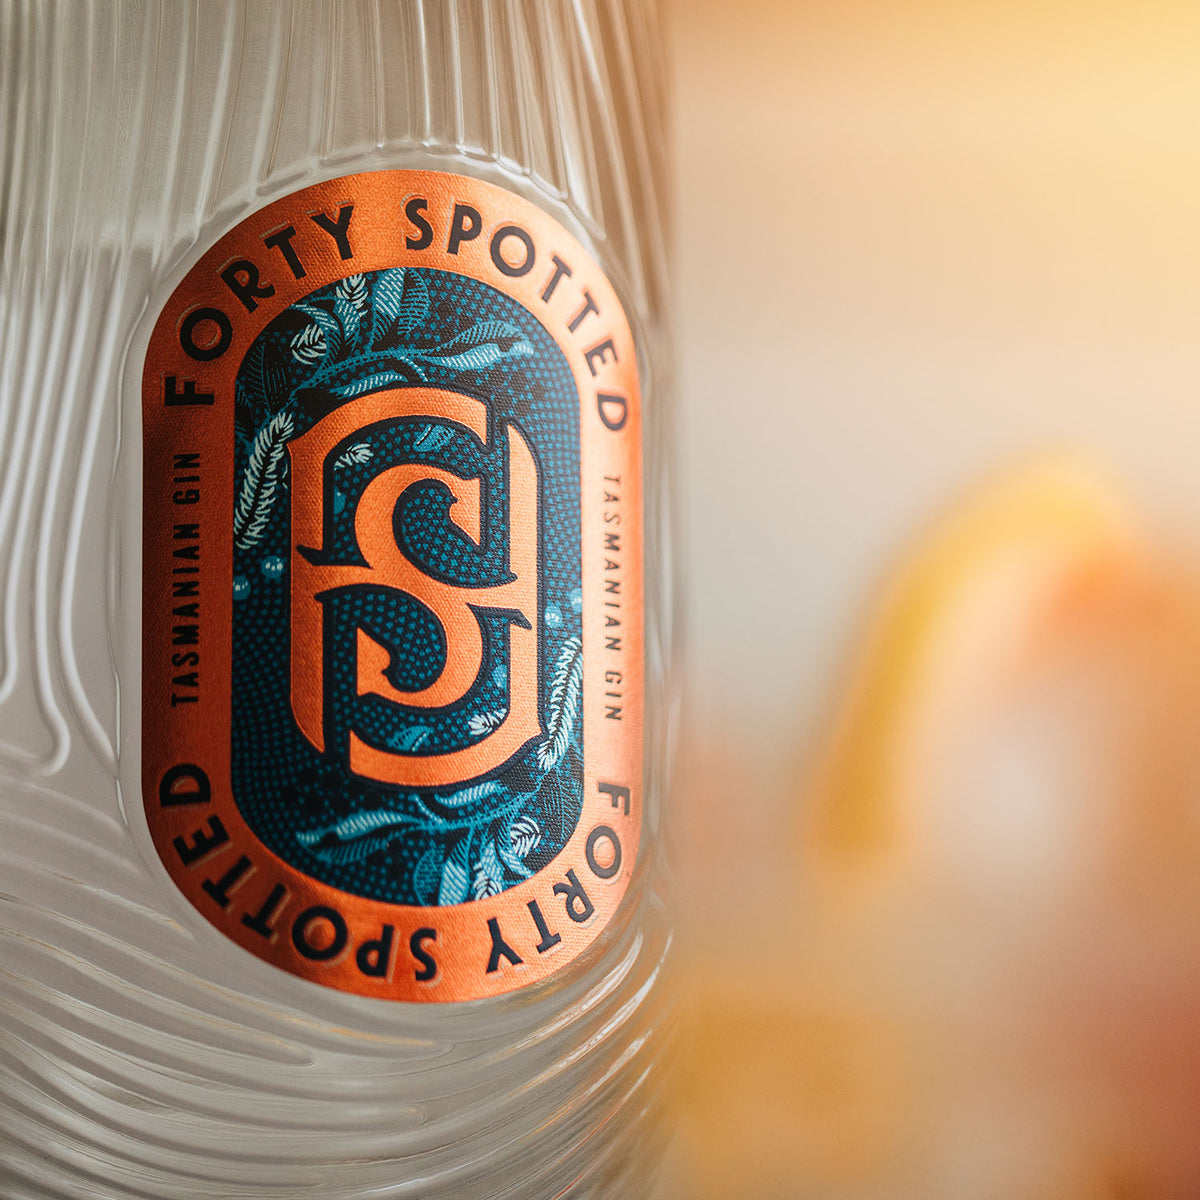 Forty Spotted Gin | Classic Release | Lark Distillery | 700ml